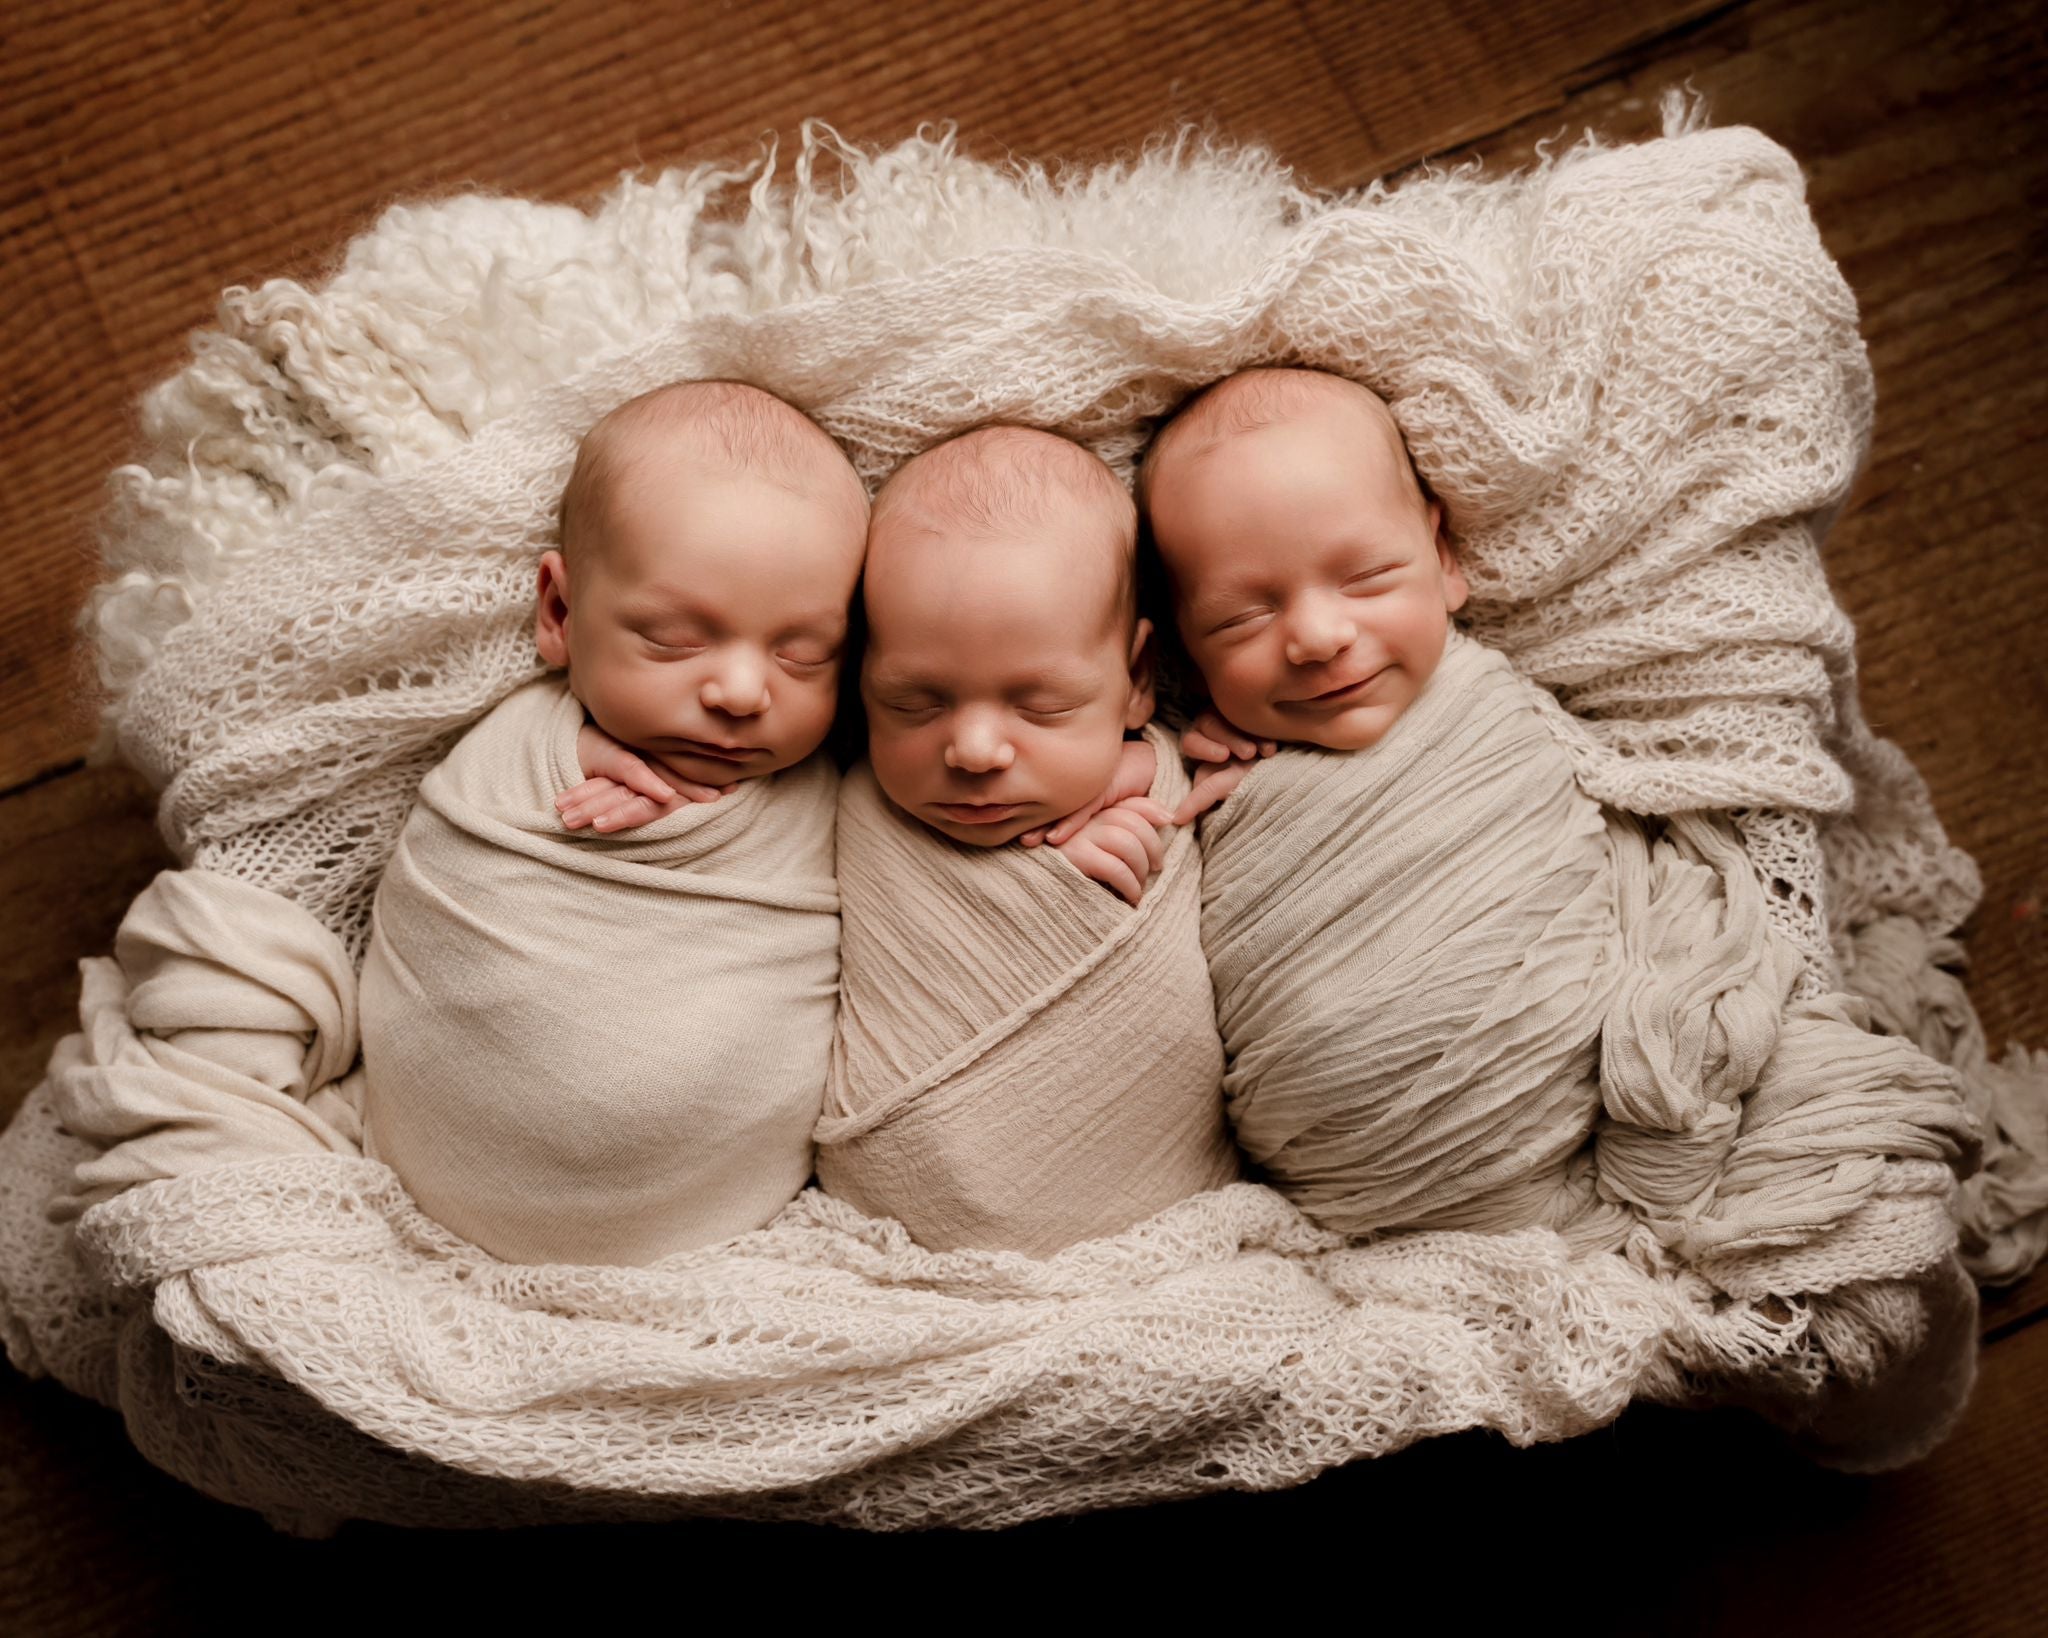 Hodgkin lymphoma: Cancer patient beats 200 million odds to welcome identical triplets | The Independent